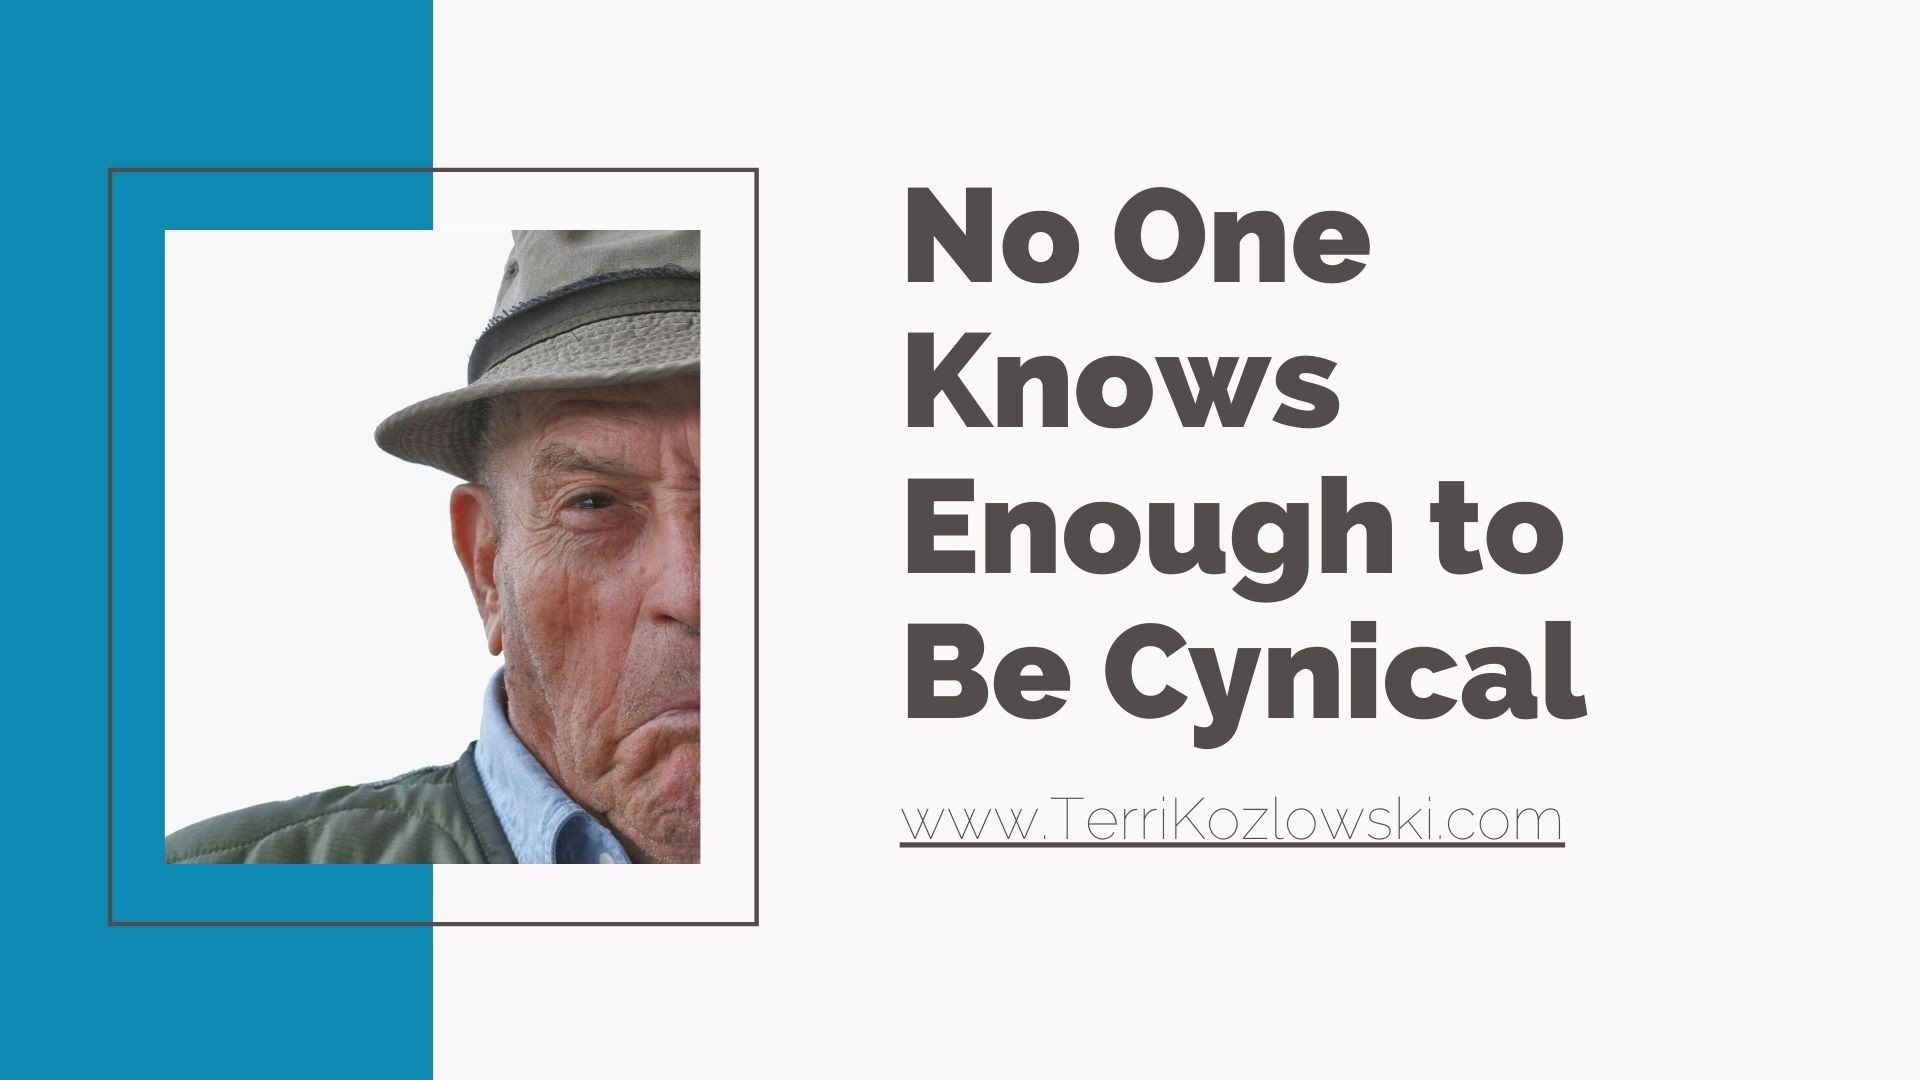 No On Knows Enough to Be Cynical